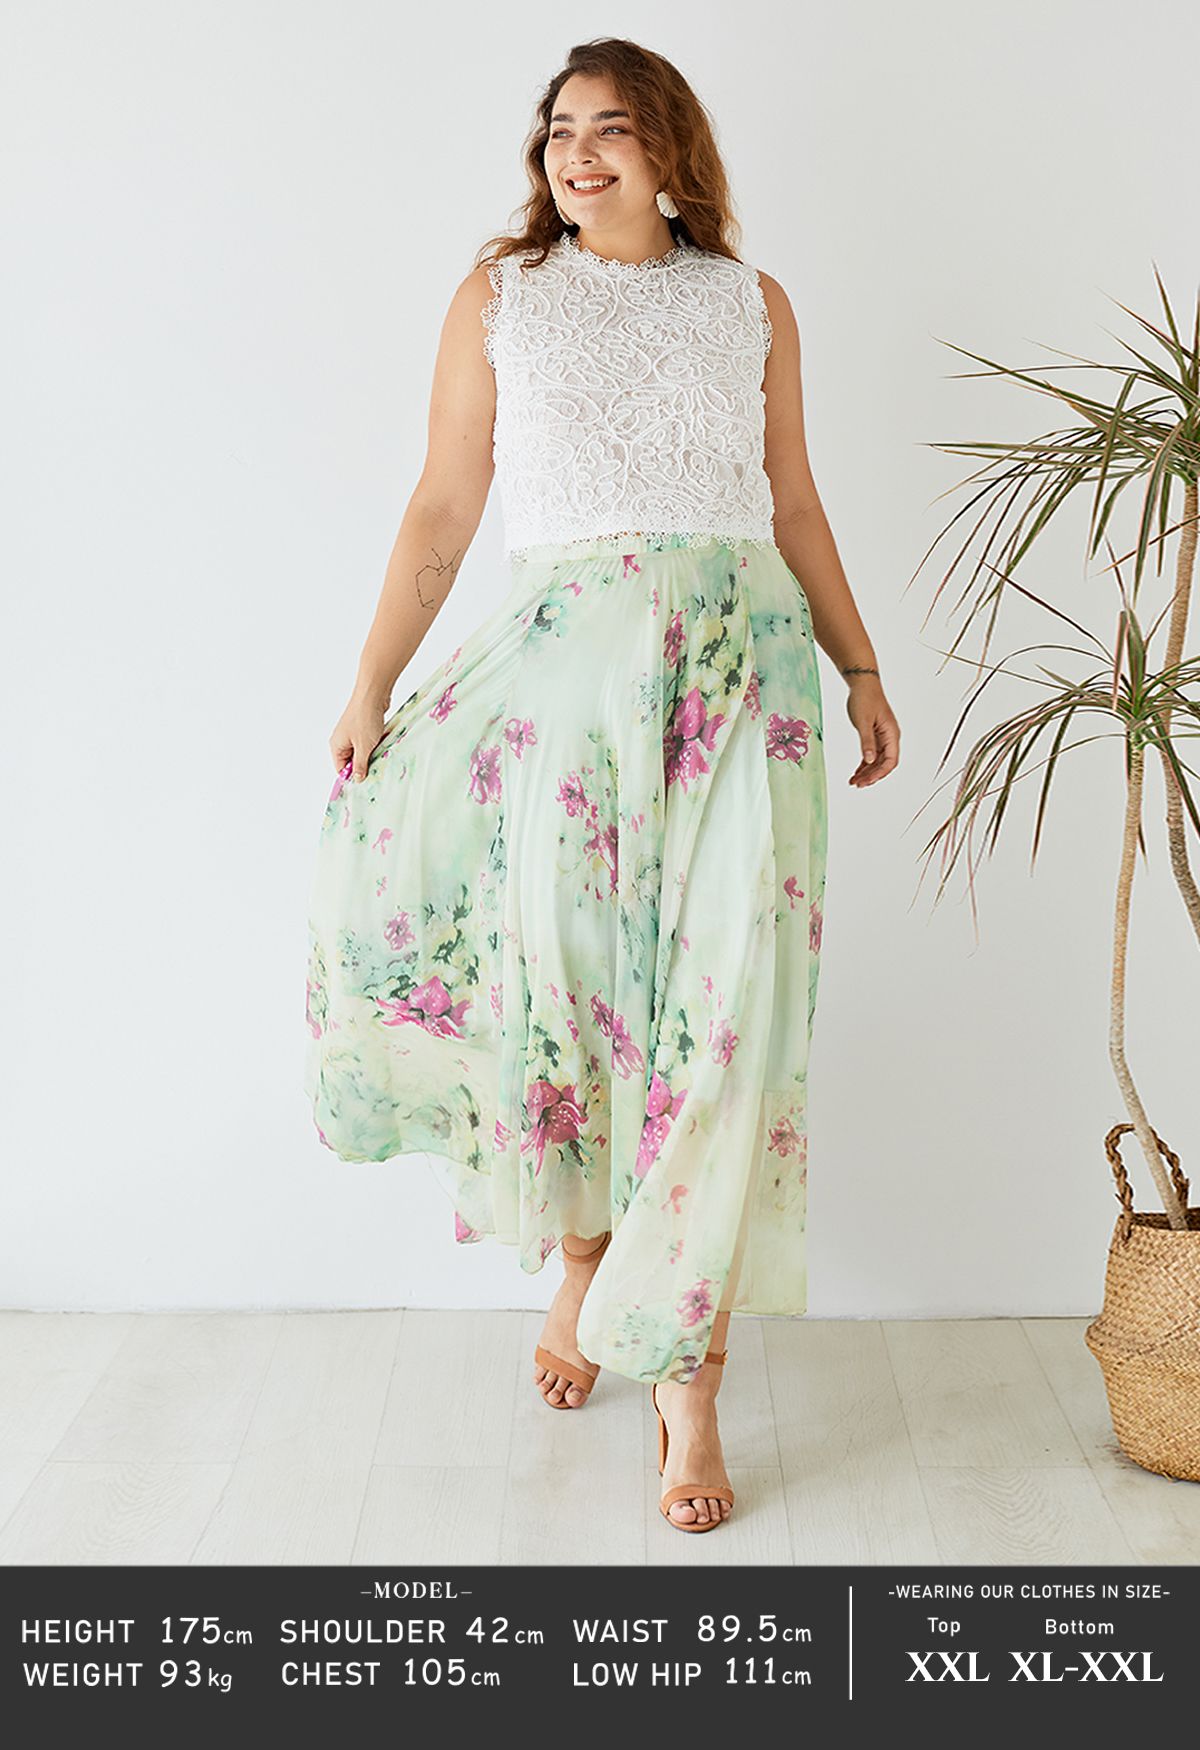 Floral and Frill Maxi Skirt